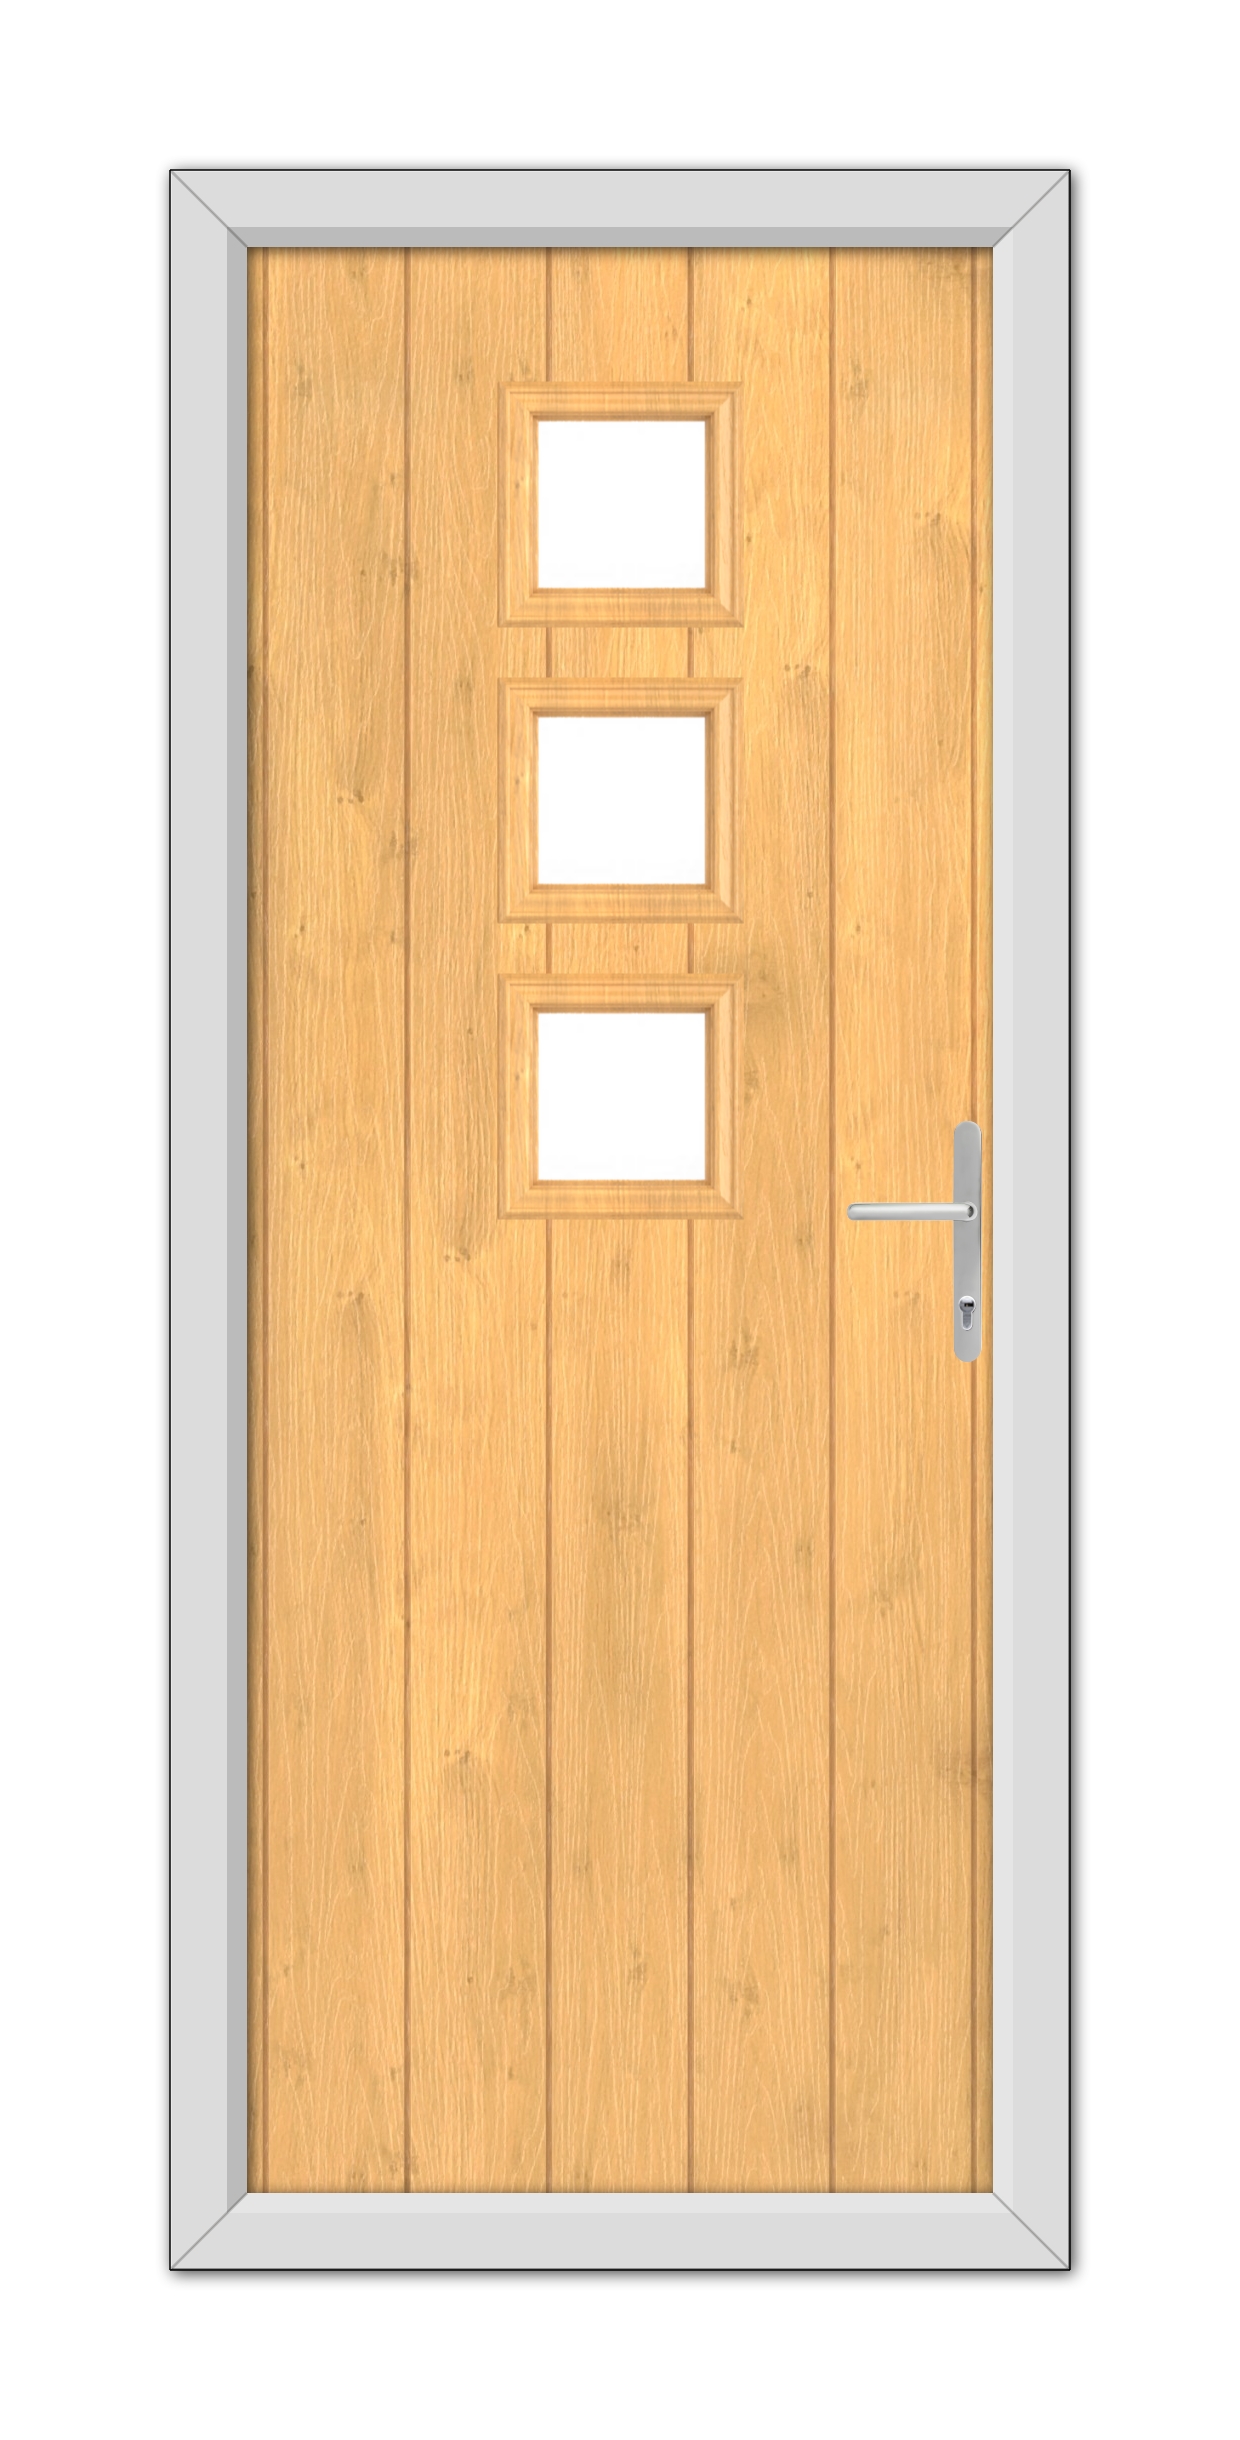 A modern "Irish Oak Montrose Composite Door 48mm Timber Core" with three small square windows and a metal handle, set within a grey frame.